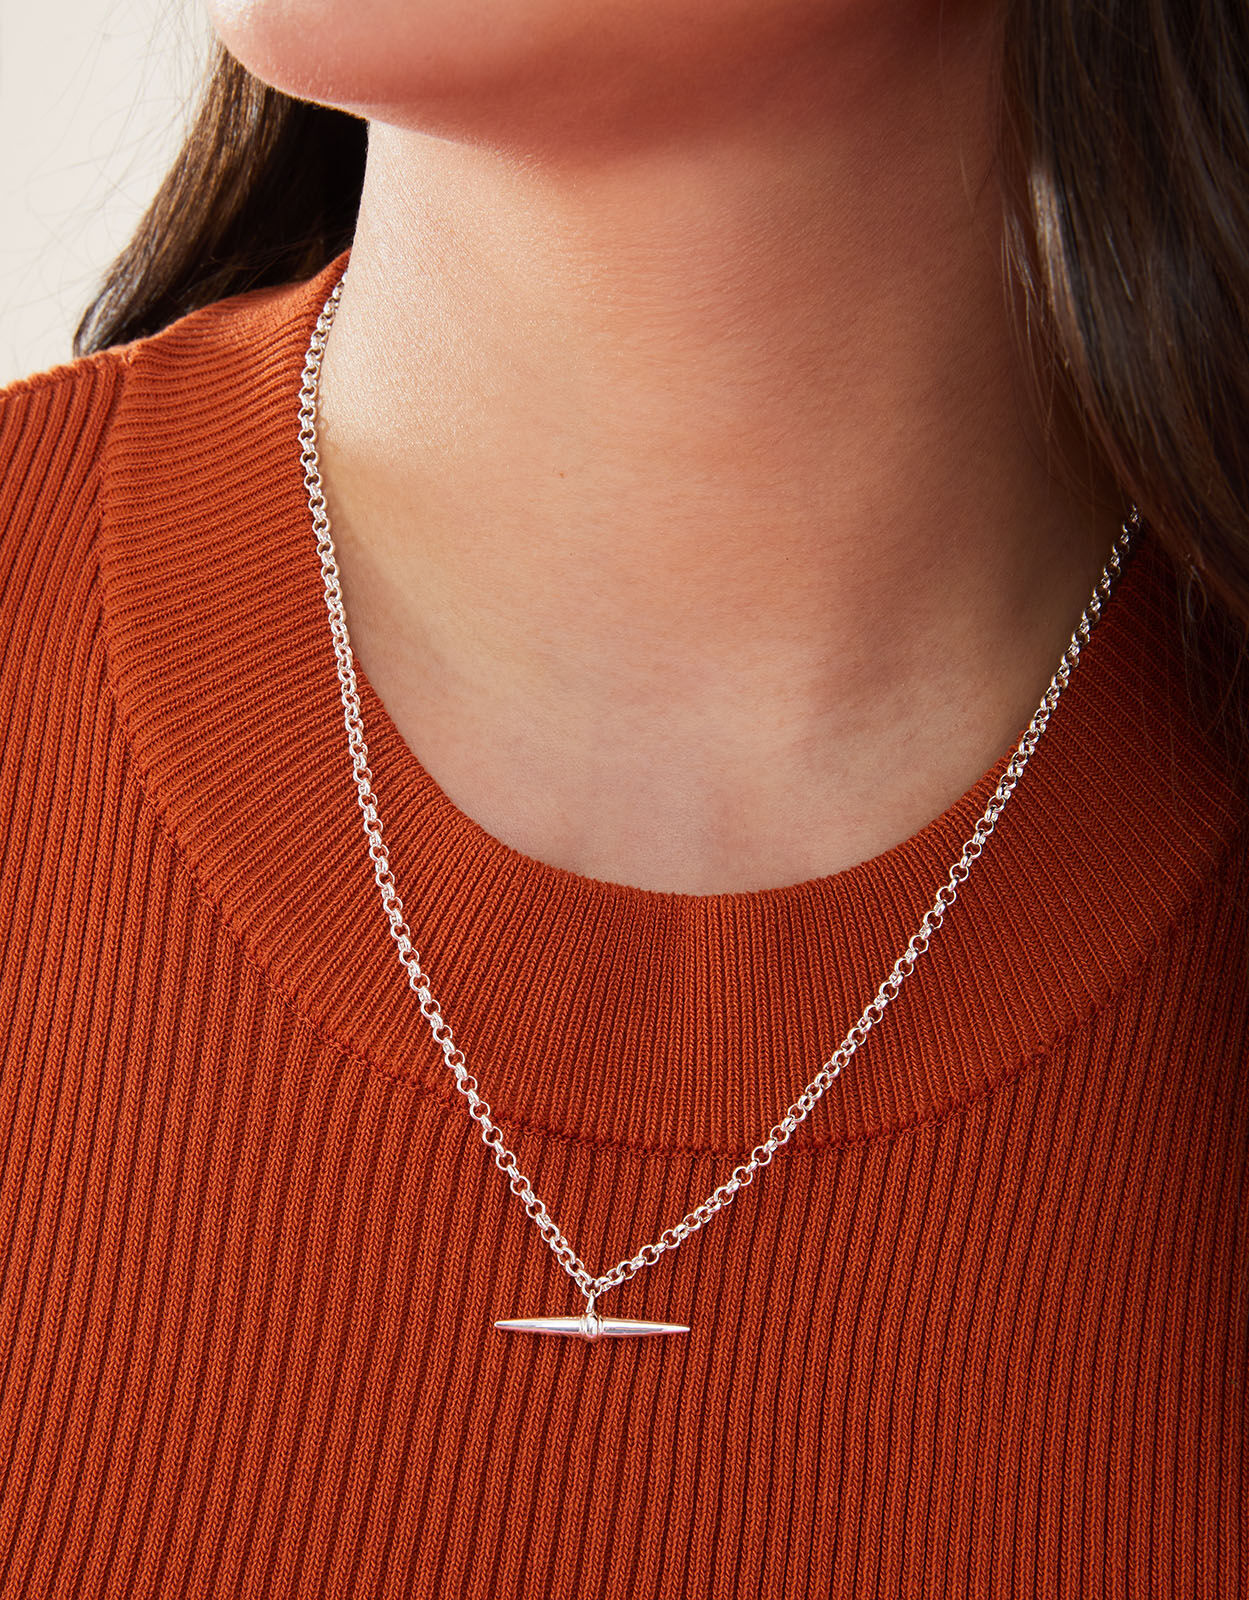 Warren James Jewellers - SALE - Now under £40 | The classic chic of this Sterling  Silver 'T Bar' and heart lariat necklace will draw admiring glances  whenever worn. The solid belcher